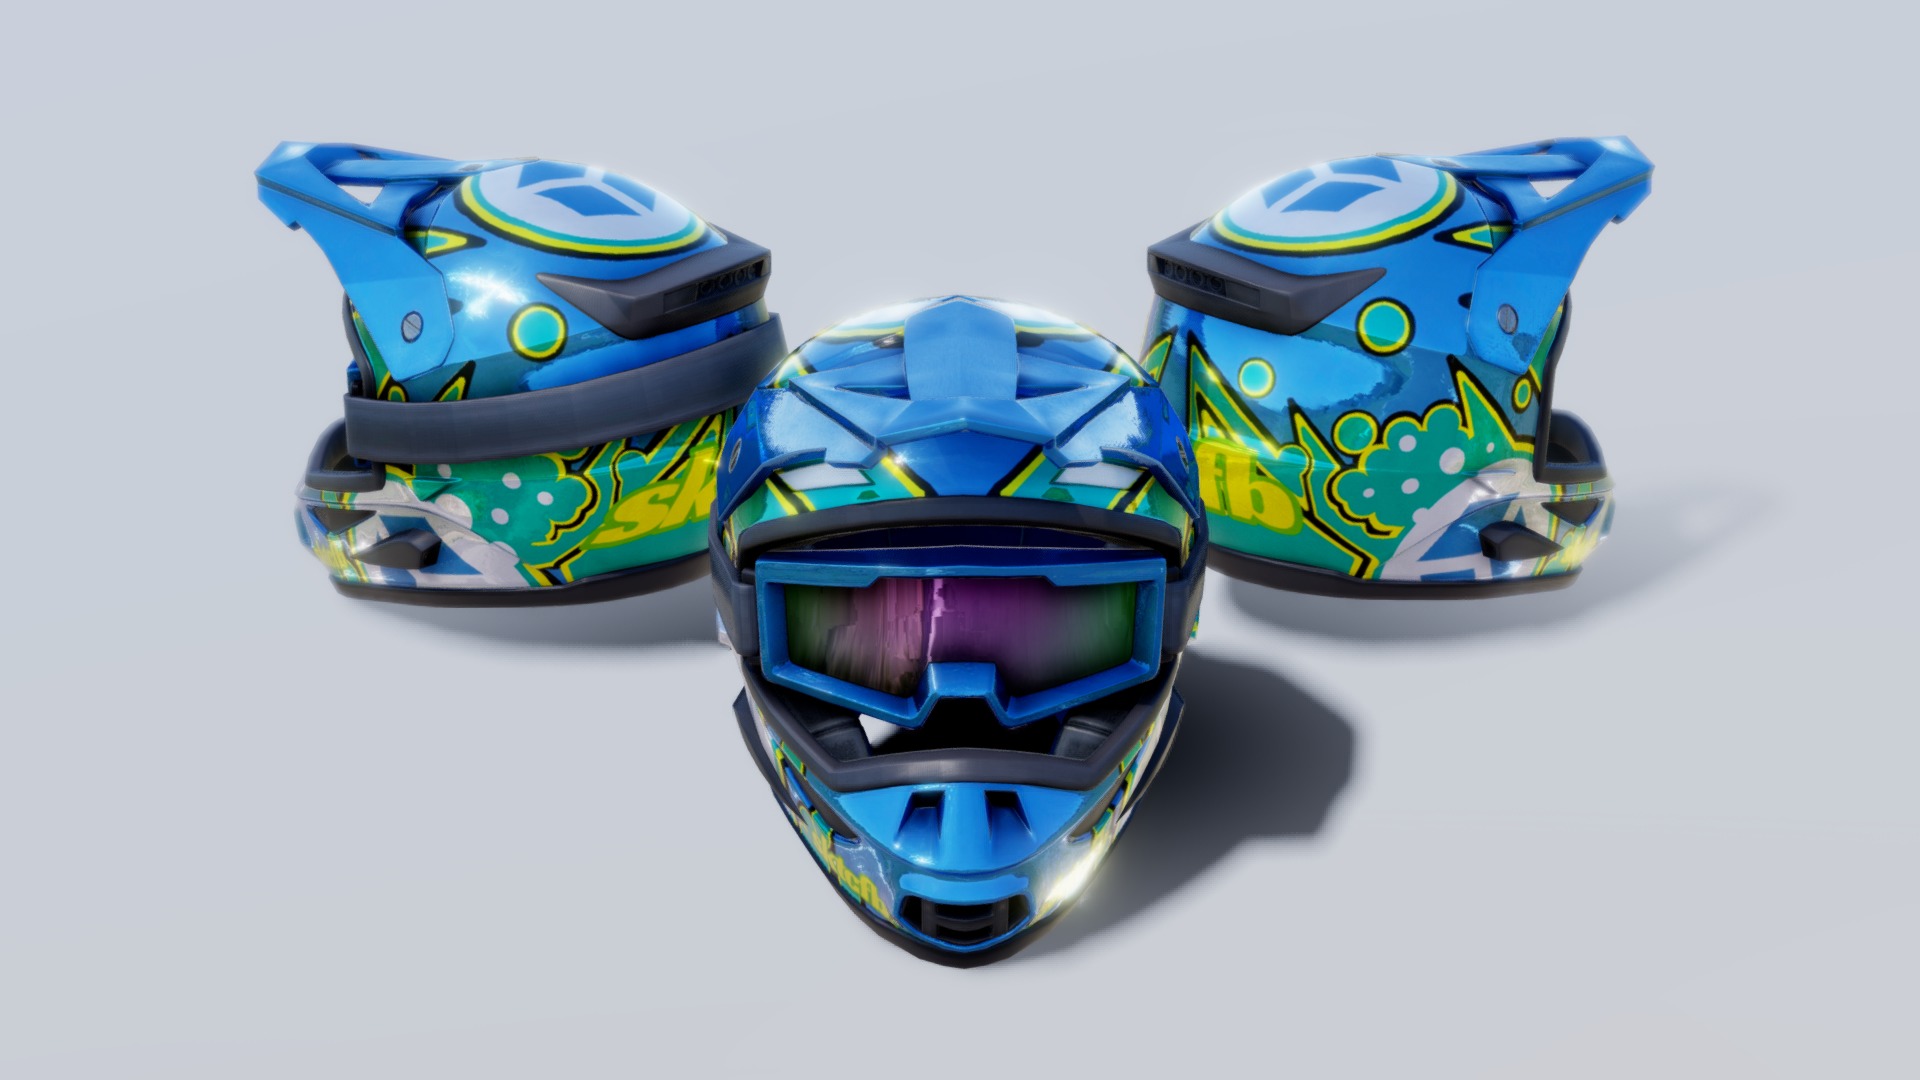 3D model Motocross Helmet Mockup #2 - This is a 3D model of the Motocross Helmet Mockup #2. The 3D model is about a group of colorful shoes.